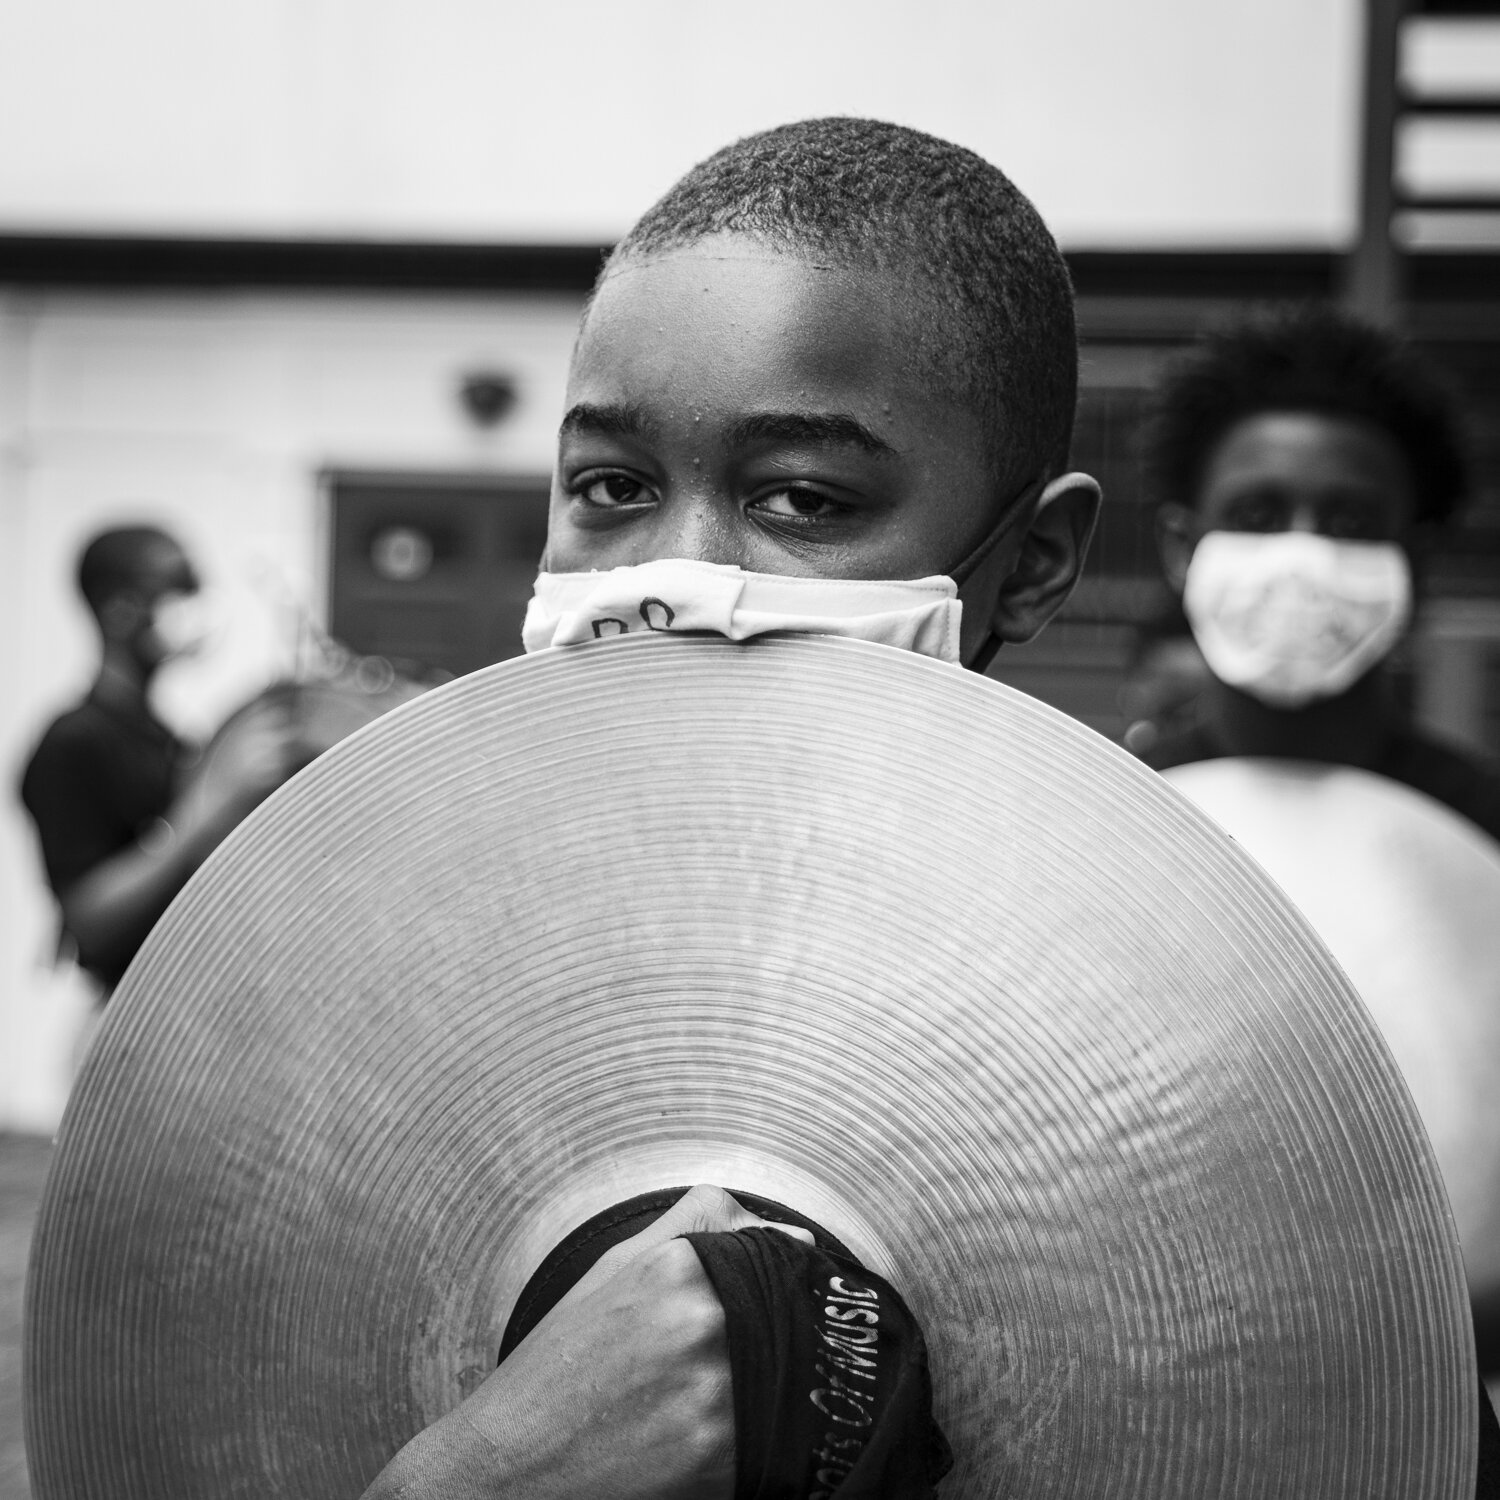  Boy and Cymbal New Orleans, 2020    1:1  